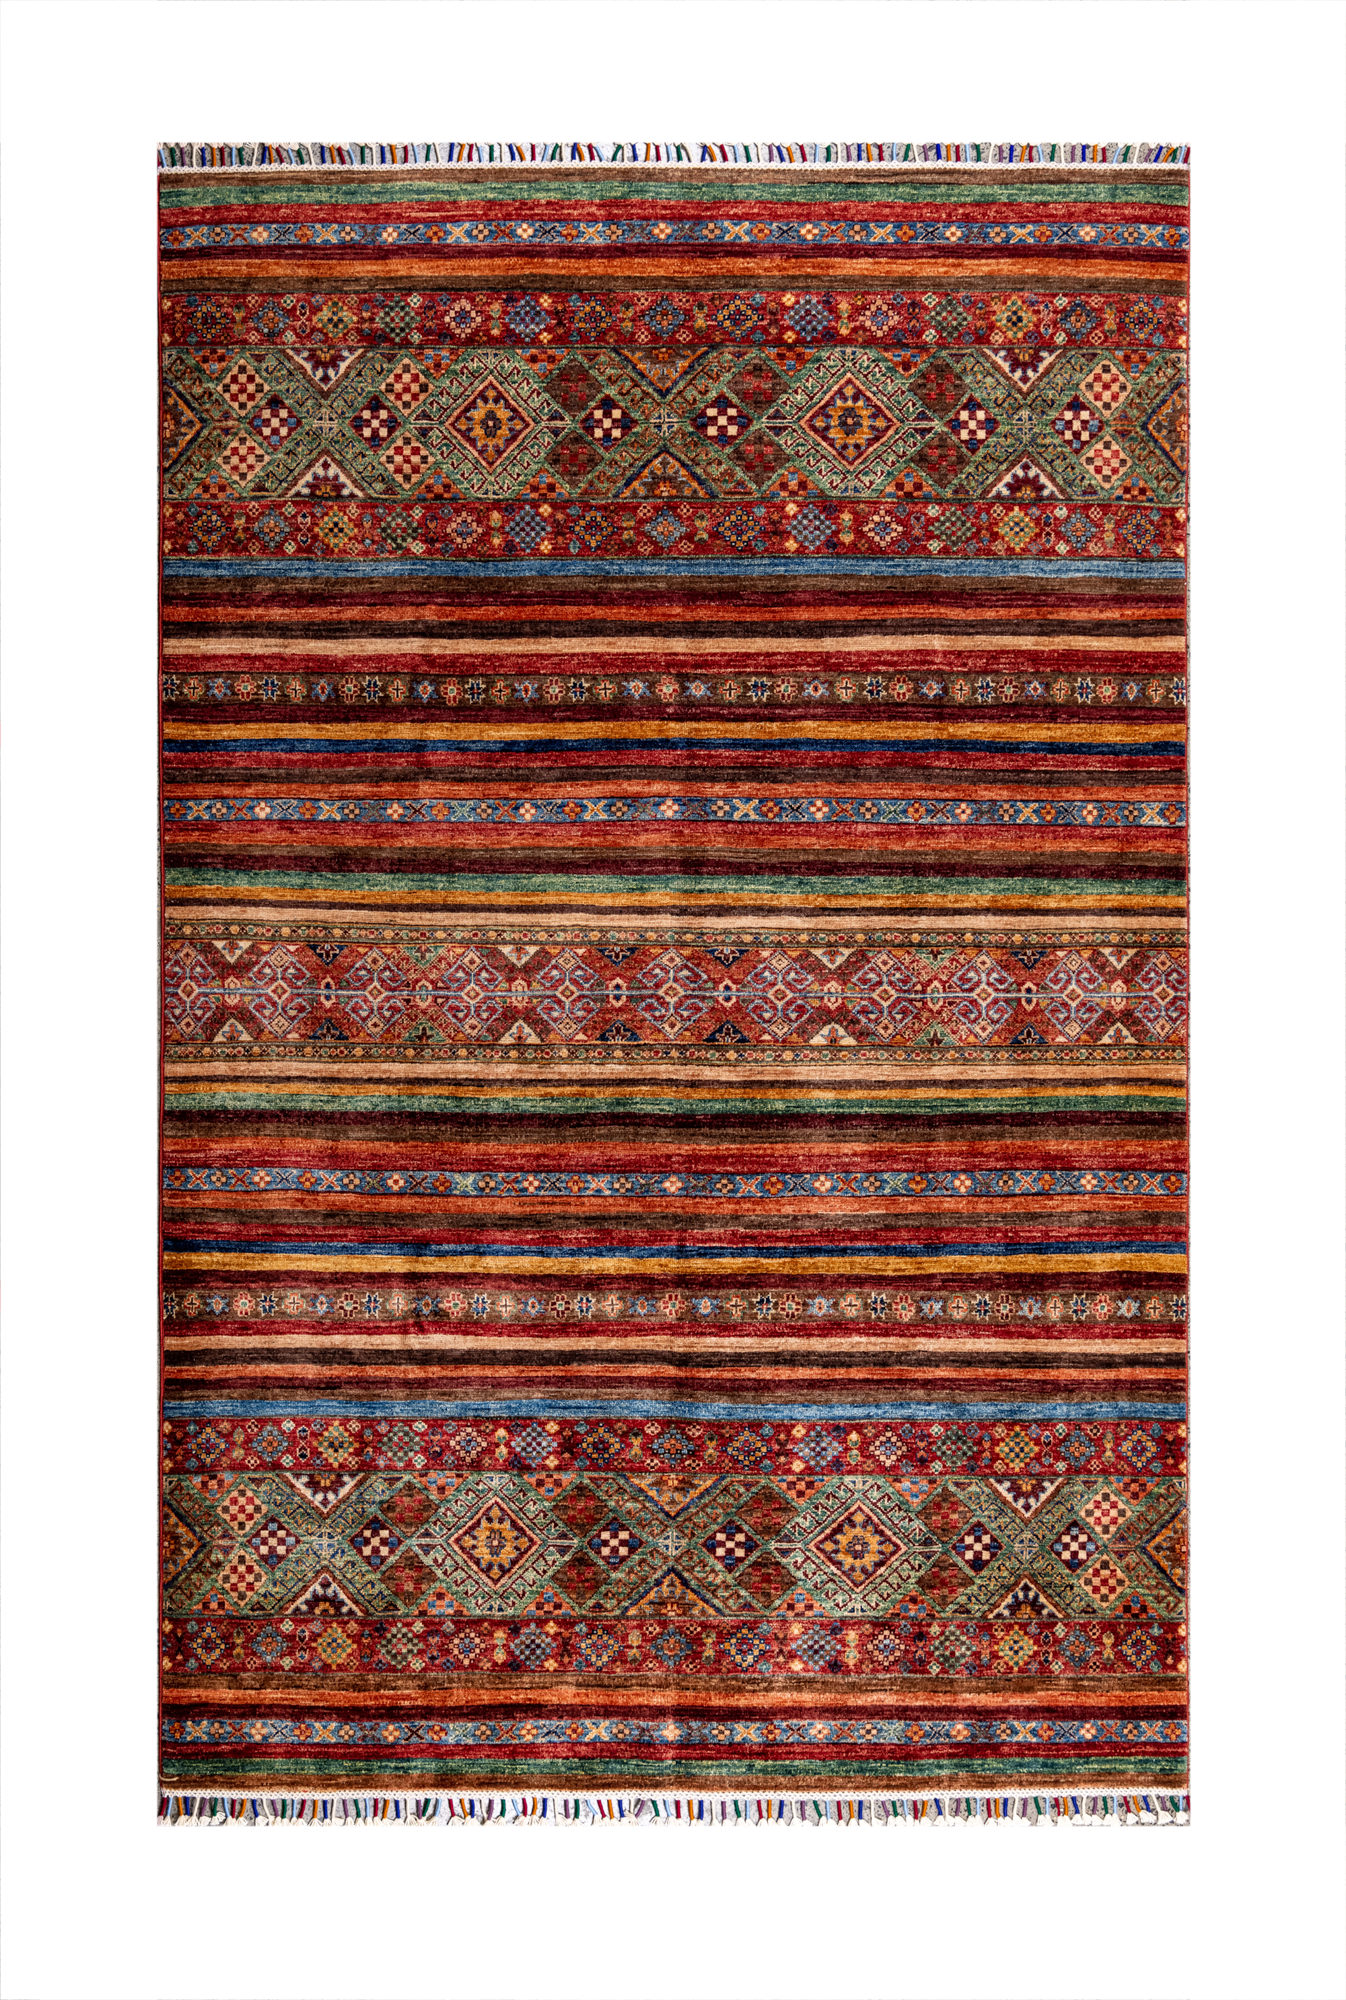 Size: 178x248cmFoundation: CottonPile: Handspun WoolShape: Rectangular Hand knotted and meticulously crafted by Afghan artisans in Afghanistan, this stunning Khorjin rug is made o